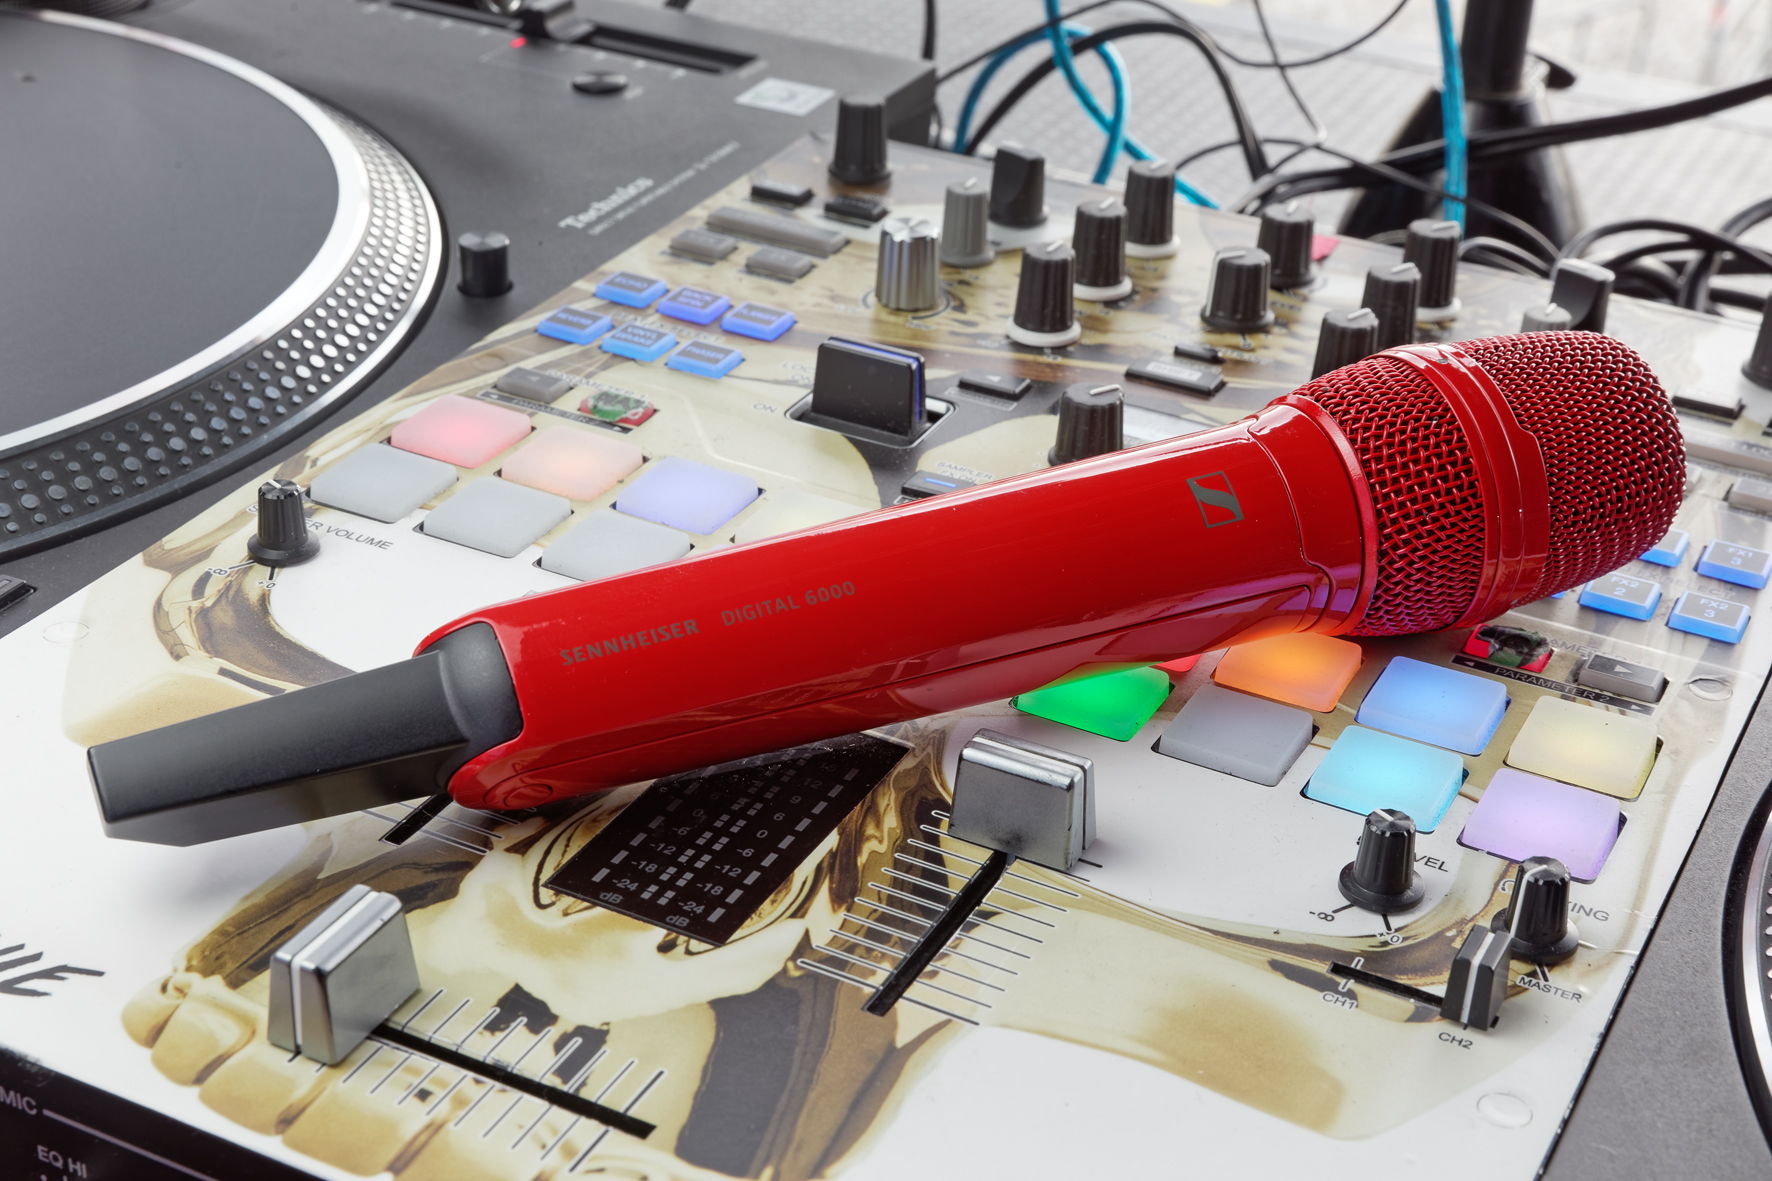 At the artist’s request, Sido’s SKM 6000 handheld transmitter was given a stunning bright red finish at the Sennheiser factory in Wedemark – in keeping with the artwork of his latest album